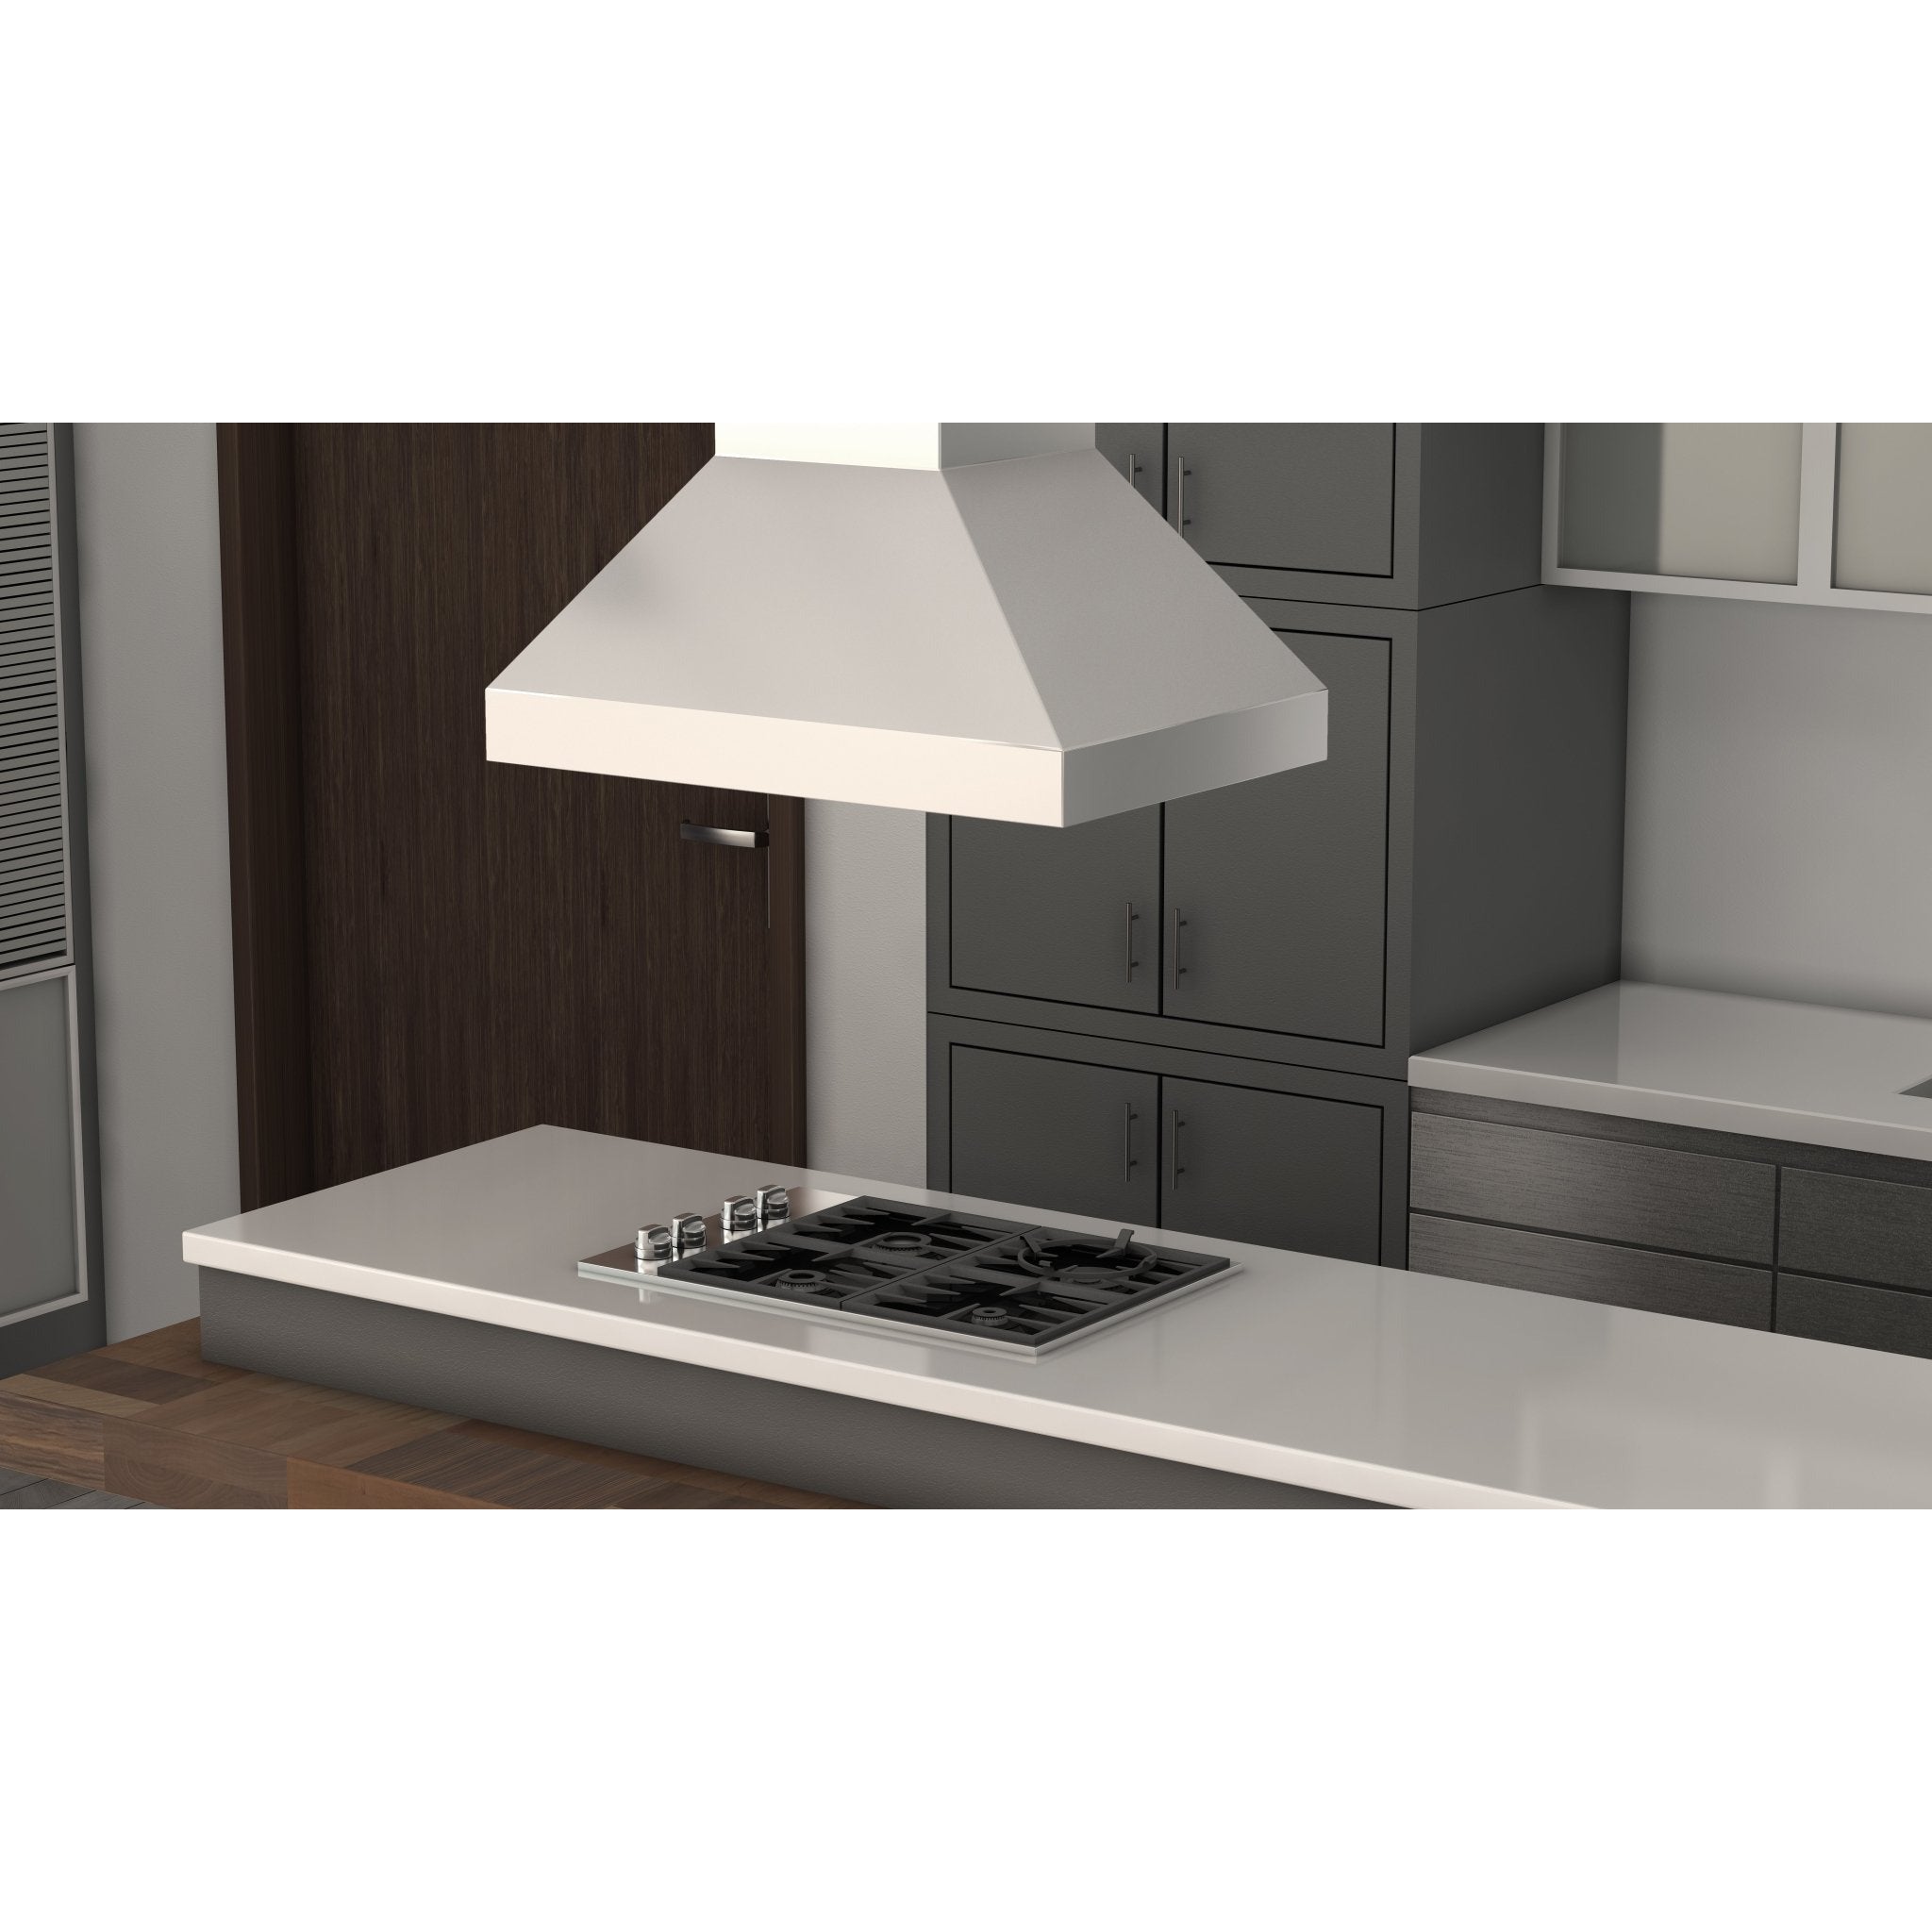 ZLINE Ducted Island Mount Range Hood in Outdoor Approved Stainless Steel (597i-304) - New Star Living